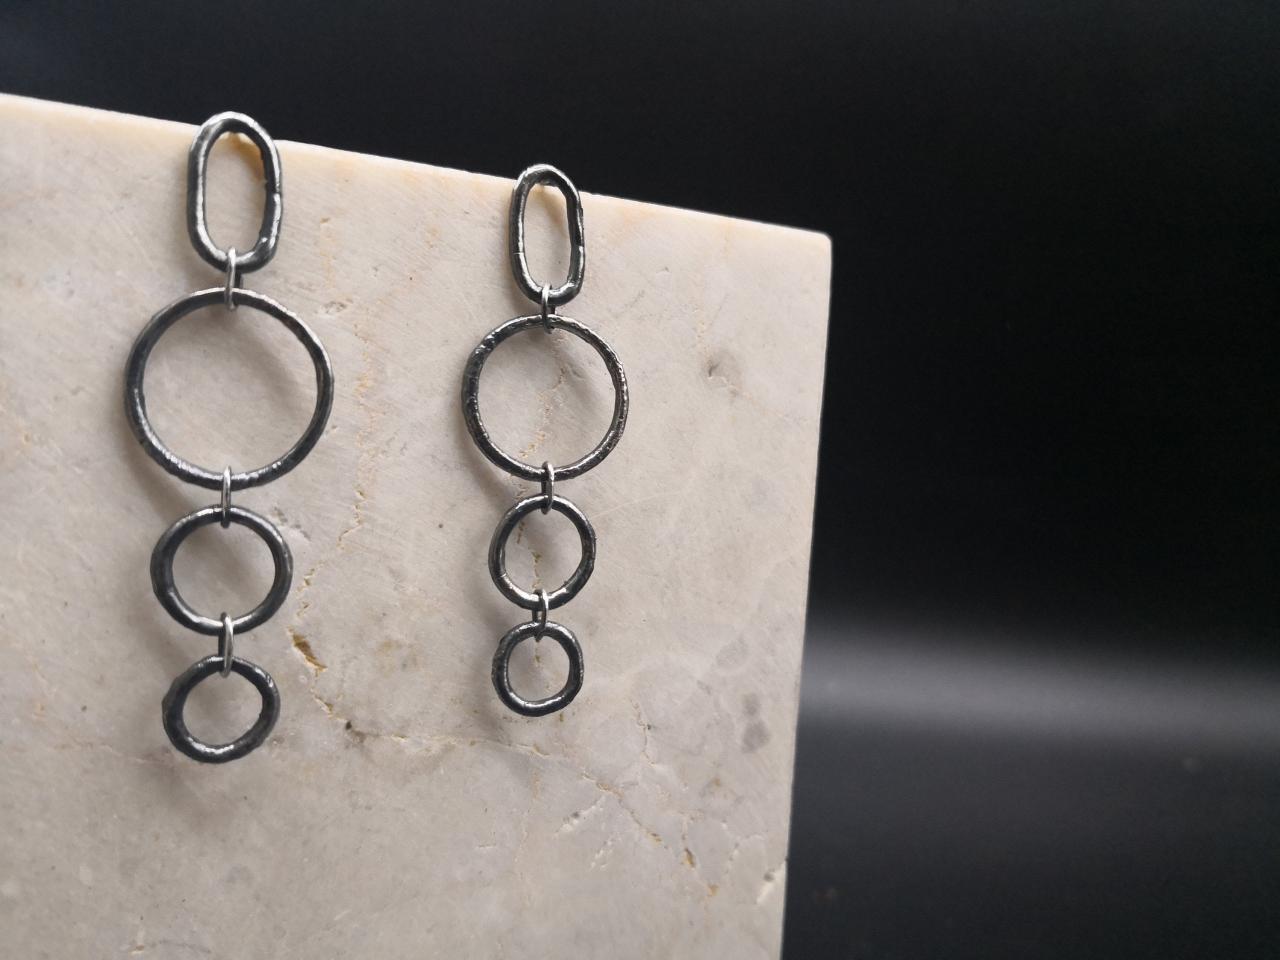 Monochromatic Long Circle Chain Earrings Handmade With Recycled Sterling Silver, Bohemian Yet Modern, Available In Polished And Oxidized.